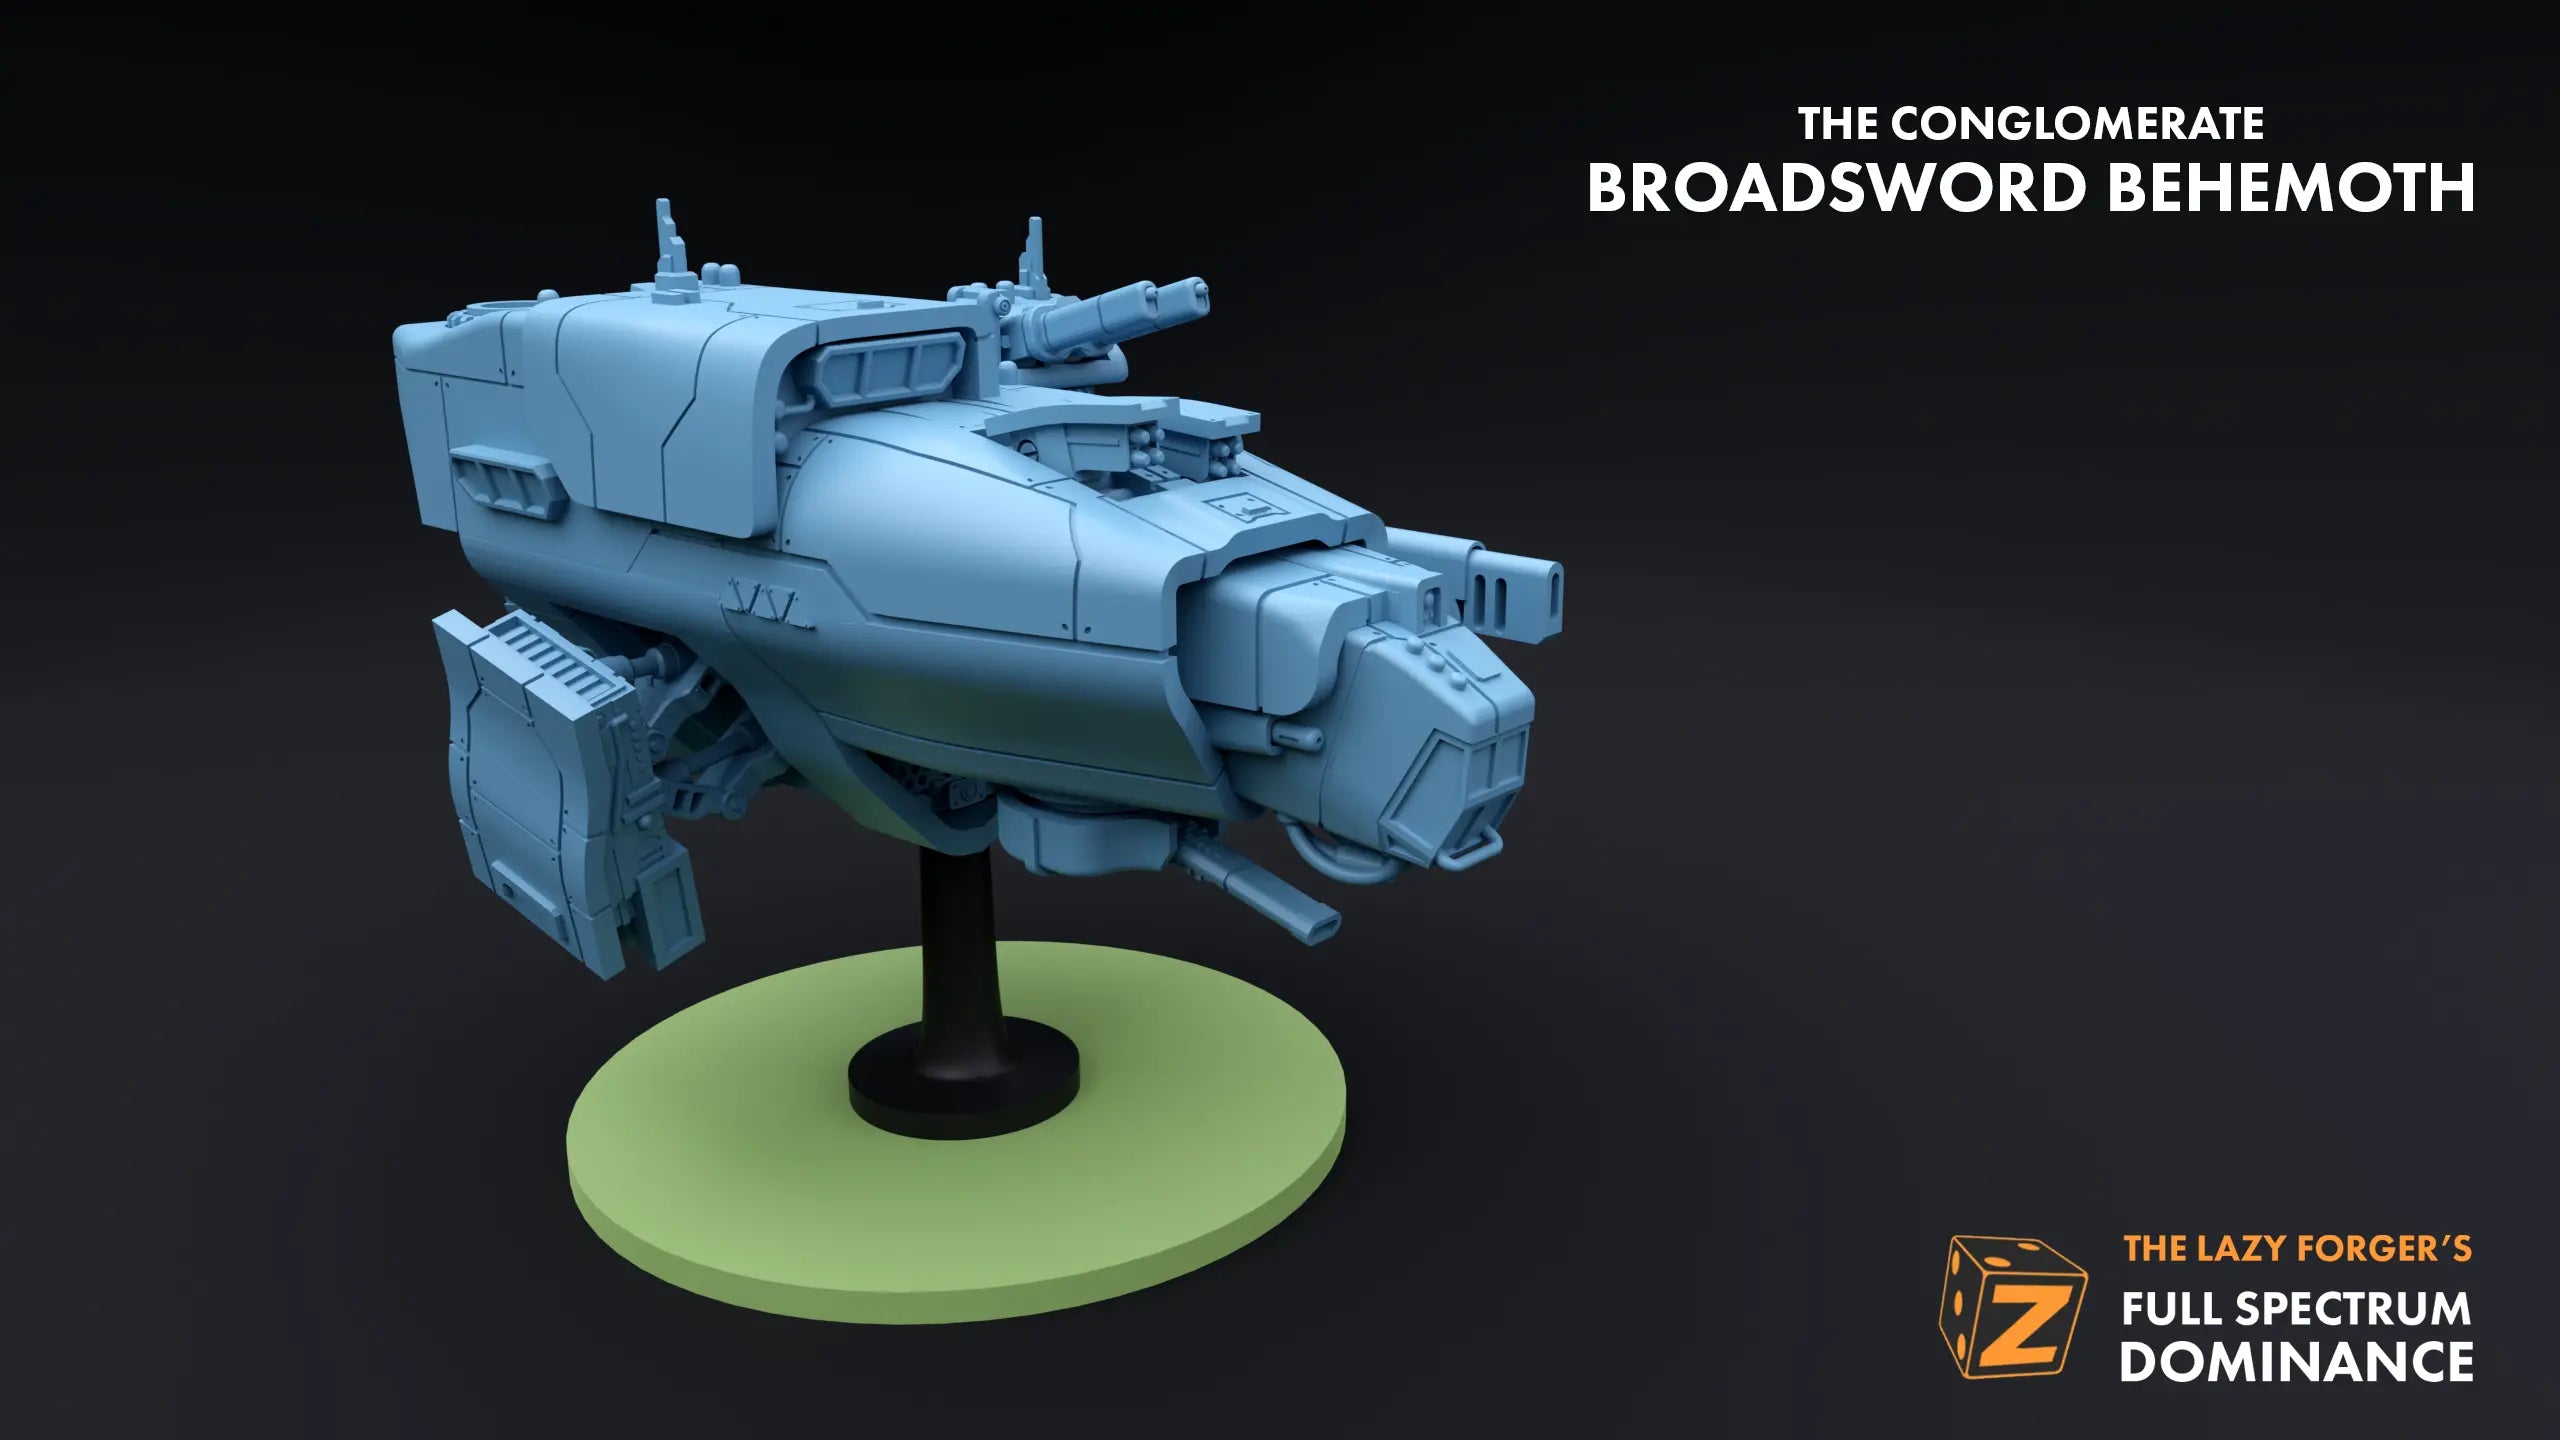 Broadsword Behemoth - The Conglomerate The Lazy Forger